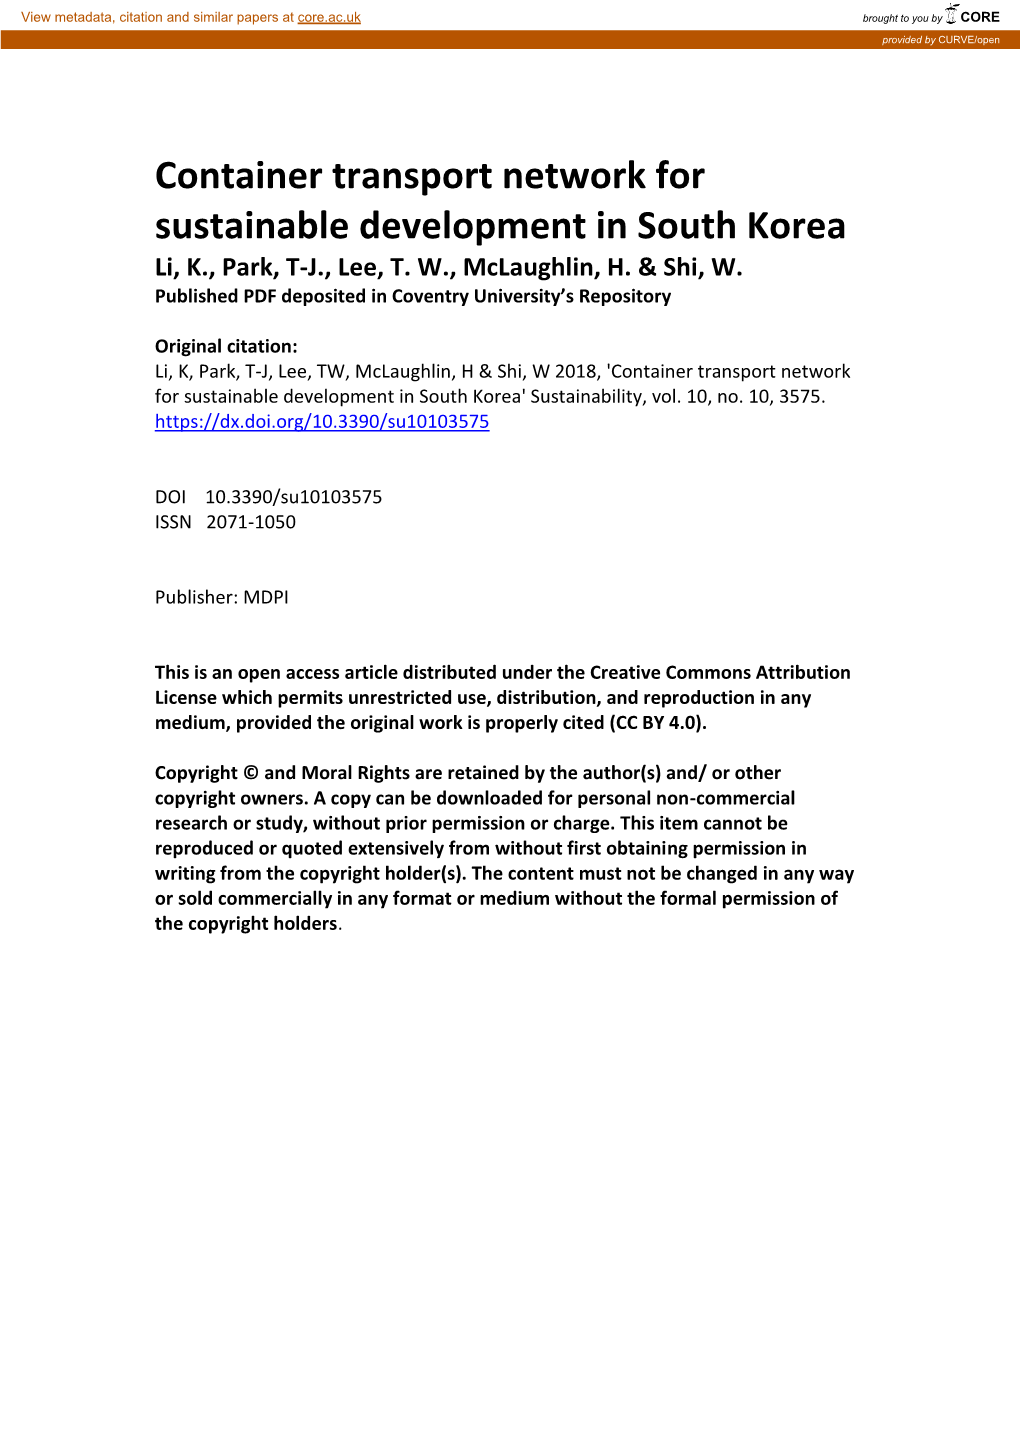 Container Transport Network for Sustainable Development in South Korea Li, K., Park, T-J., Lee, T